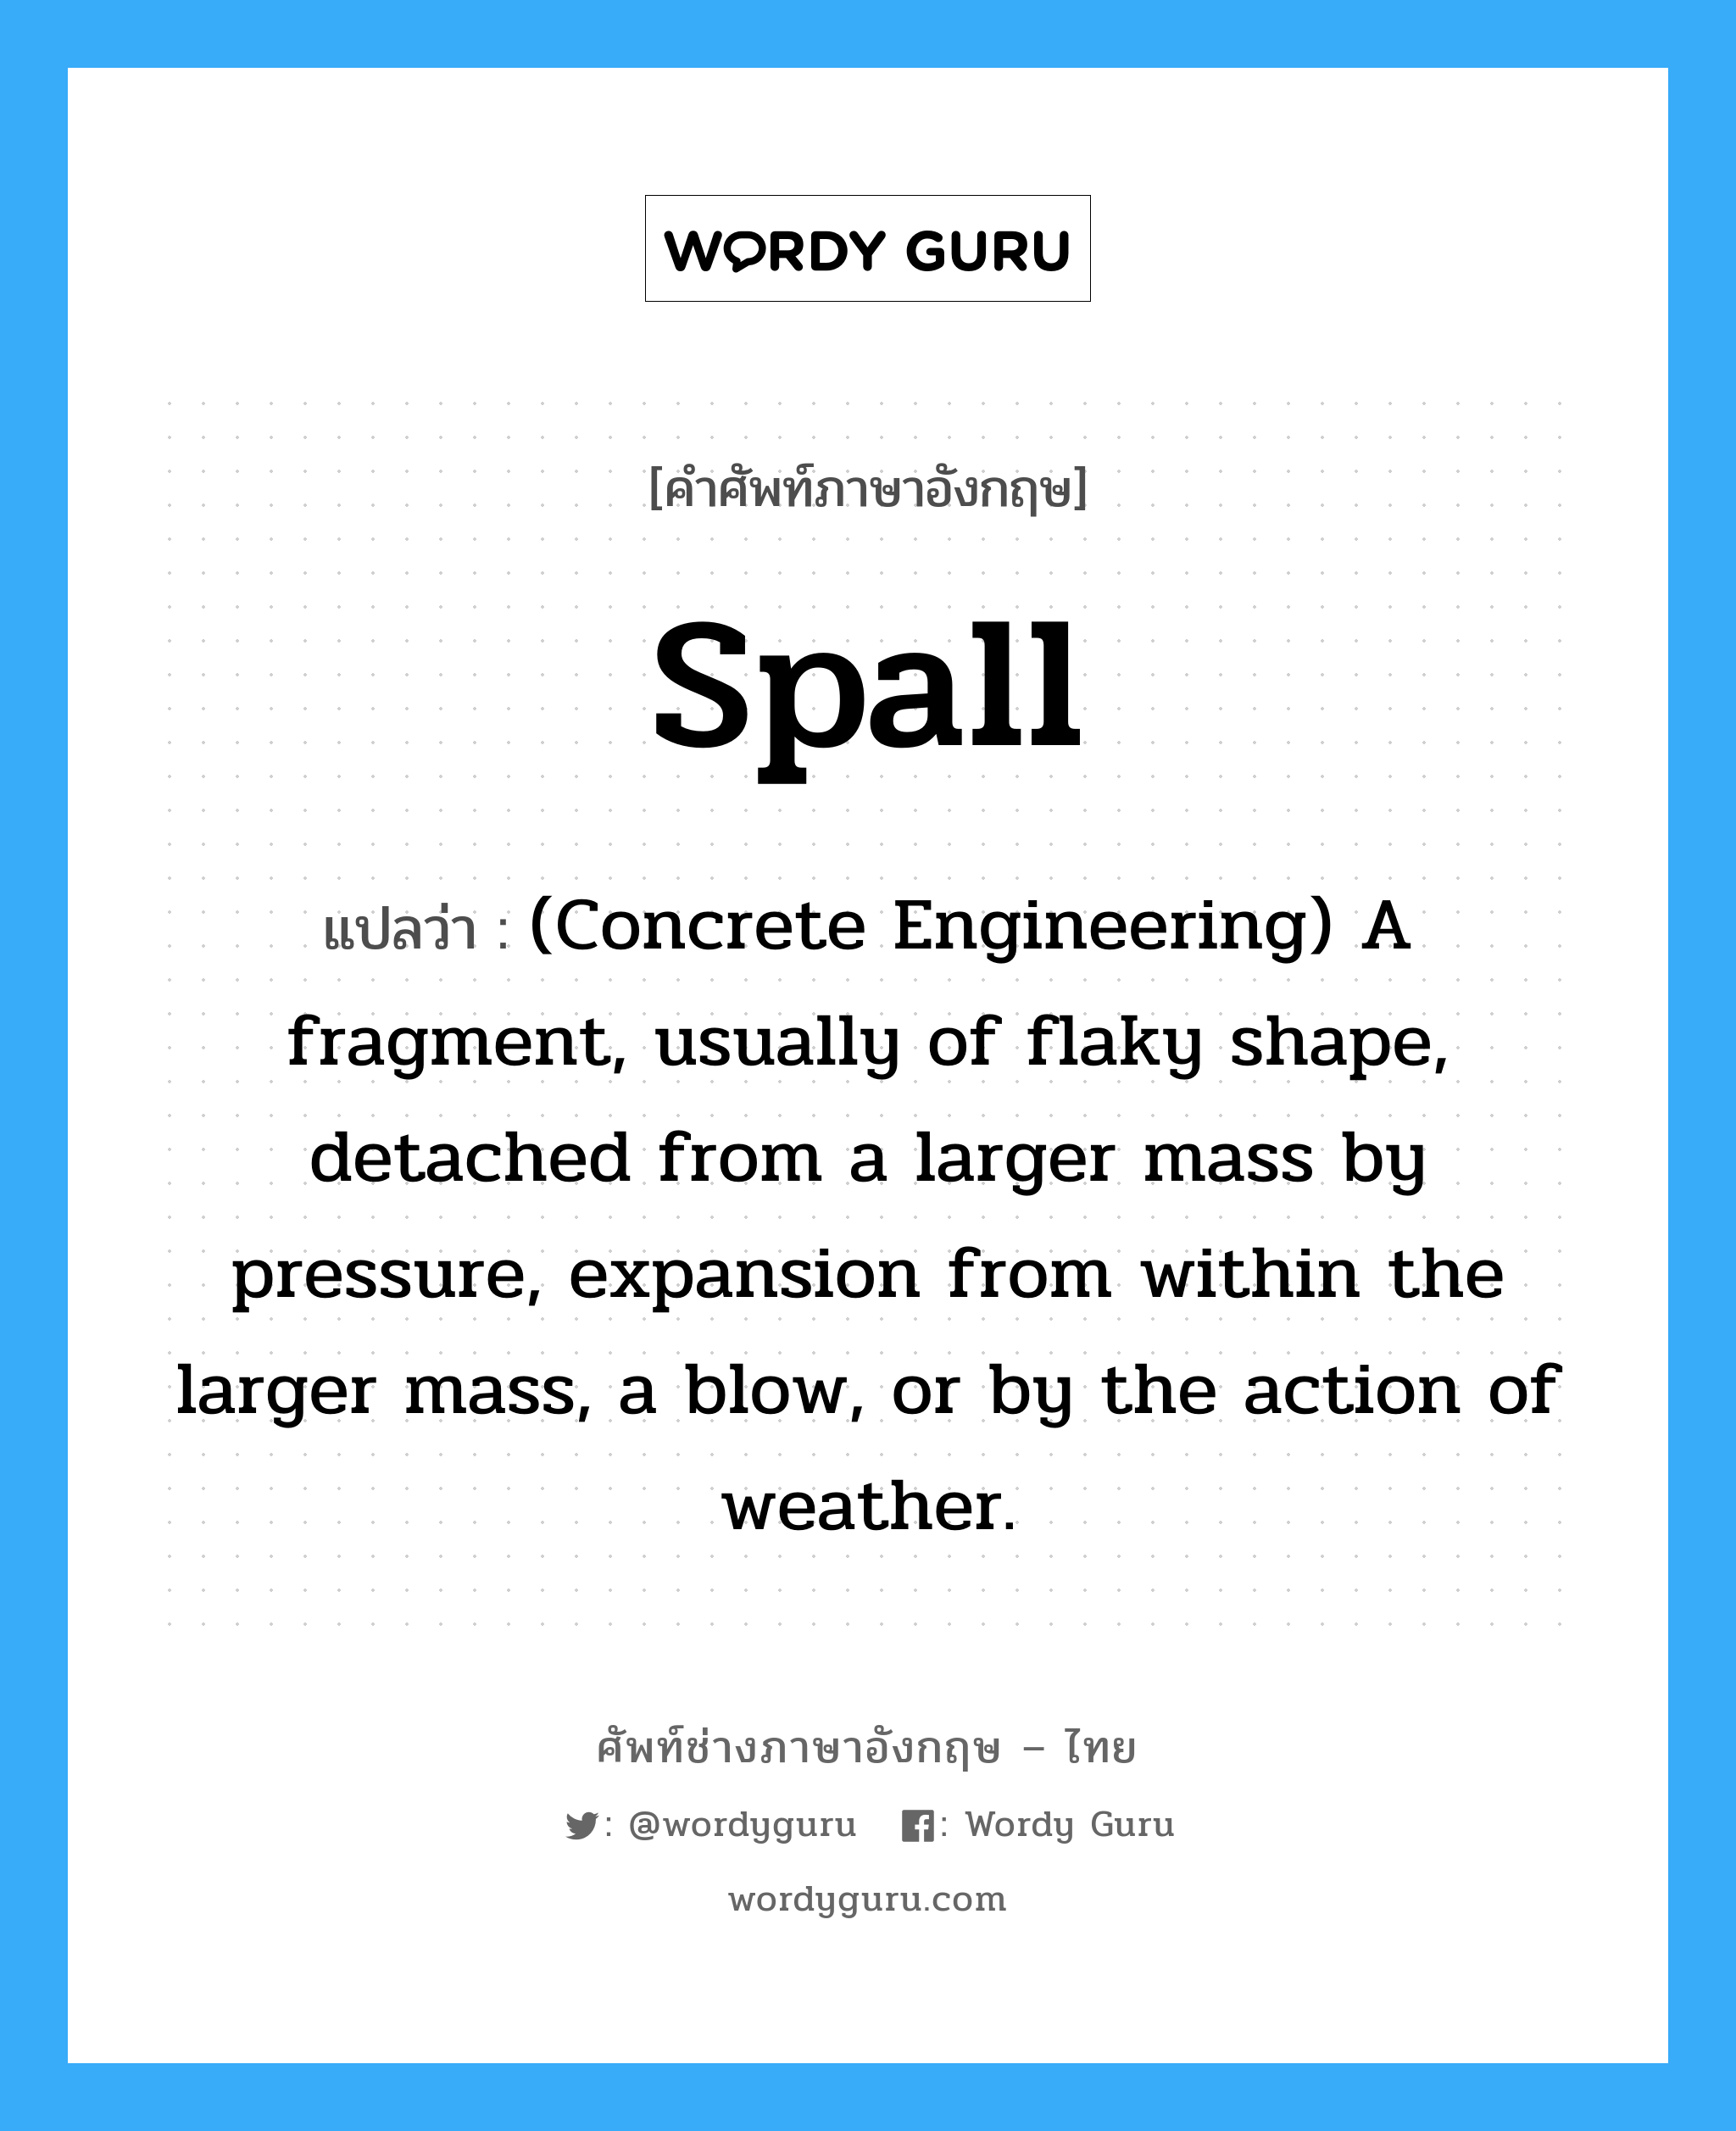 Spall แปลว่า?, คำศัพท์ช่างภาษาอังกฤษ - ไทย Spall คำศัพท์ภาษาอังกฤษ Spall แปลว่า (Concrete Engineering) A fragment, usually of flaky shape, detached from a larger mass by pressure, expansion from within the larger mass, a blow, or by the action of weather.